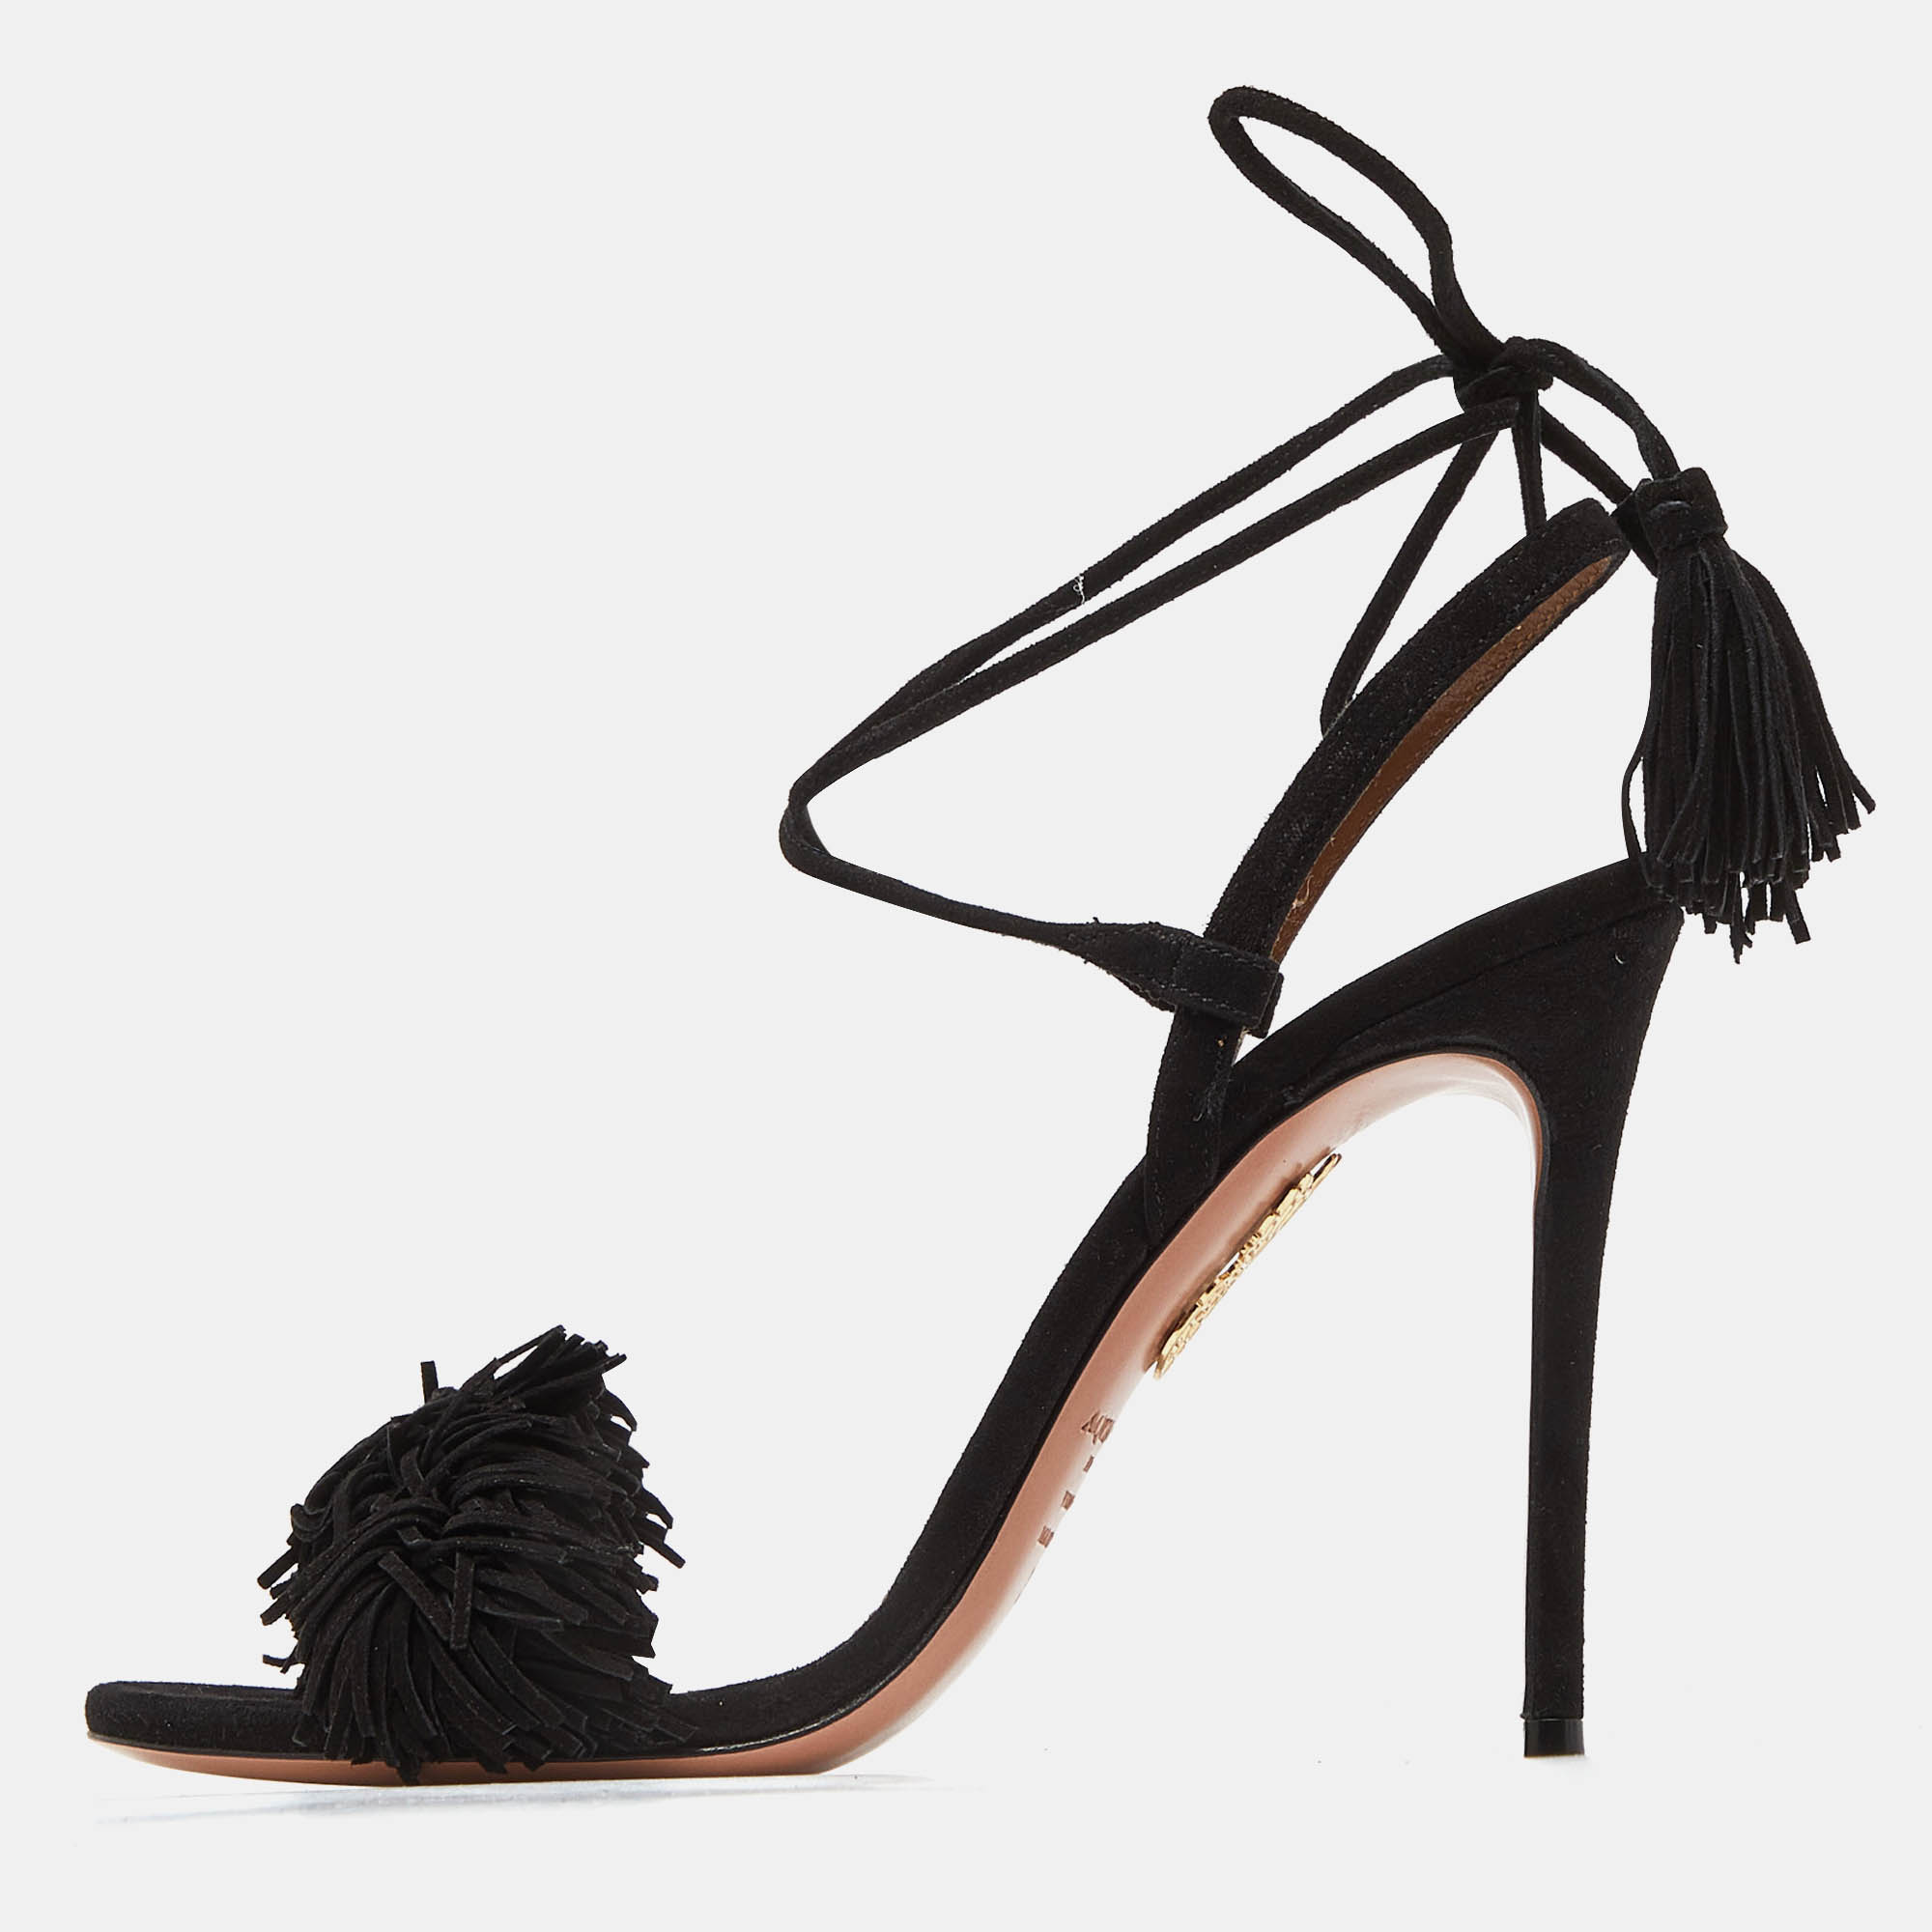 Pre-owned Aquazzura Black Suede Wild Thing Ankle Wrap Sandals Size 36